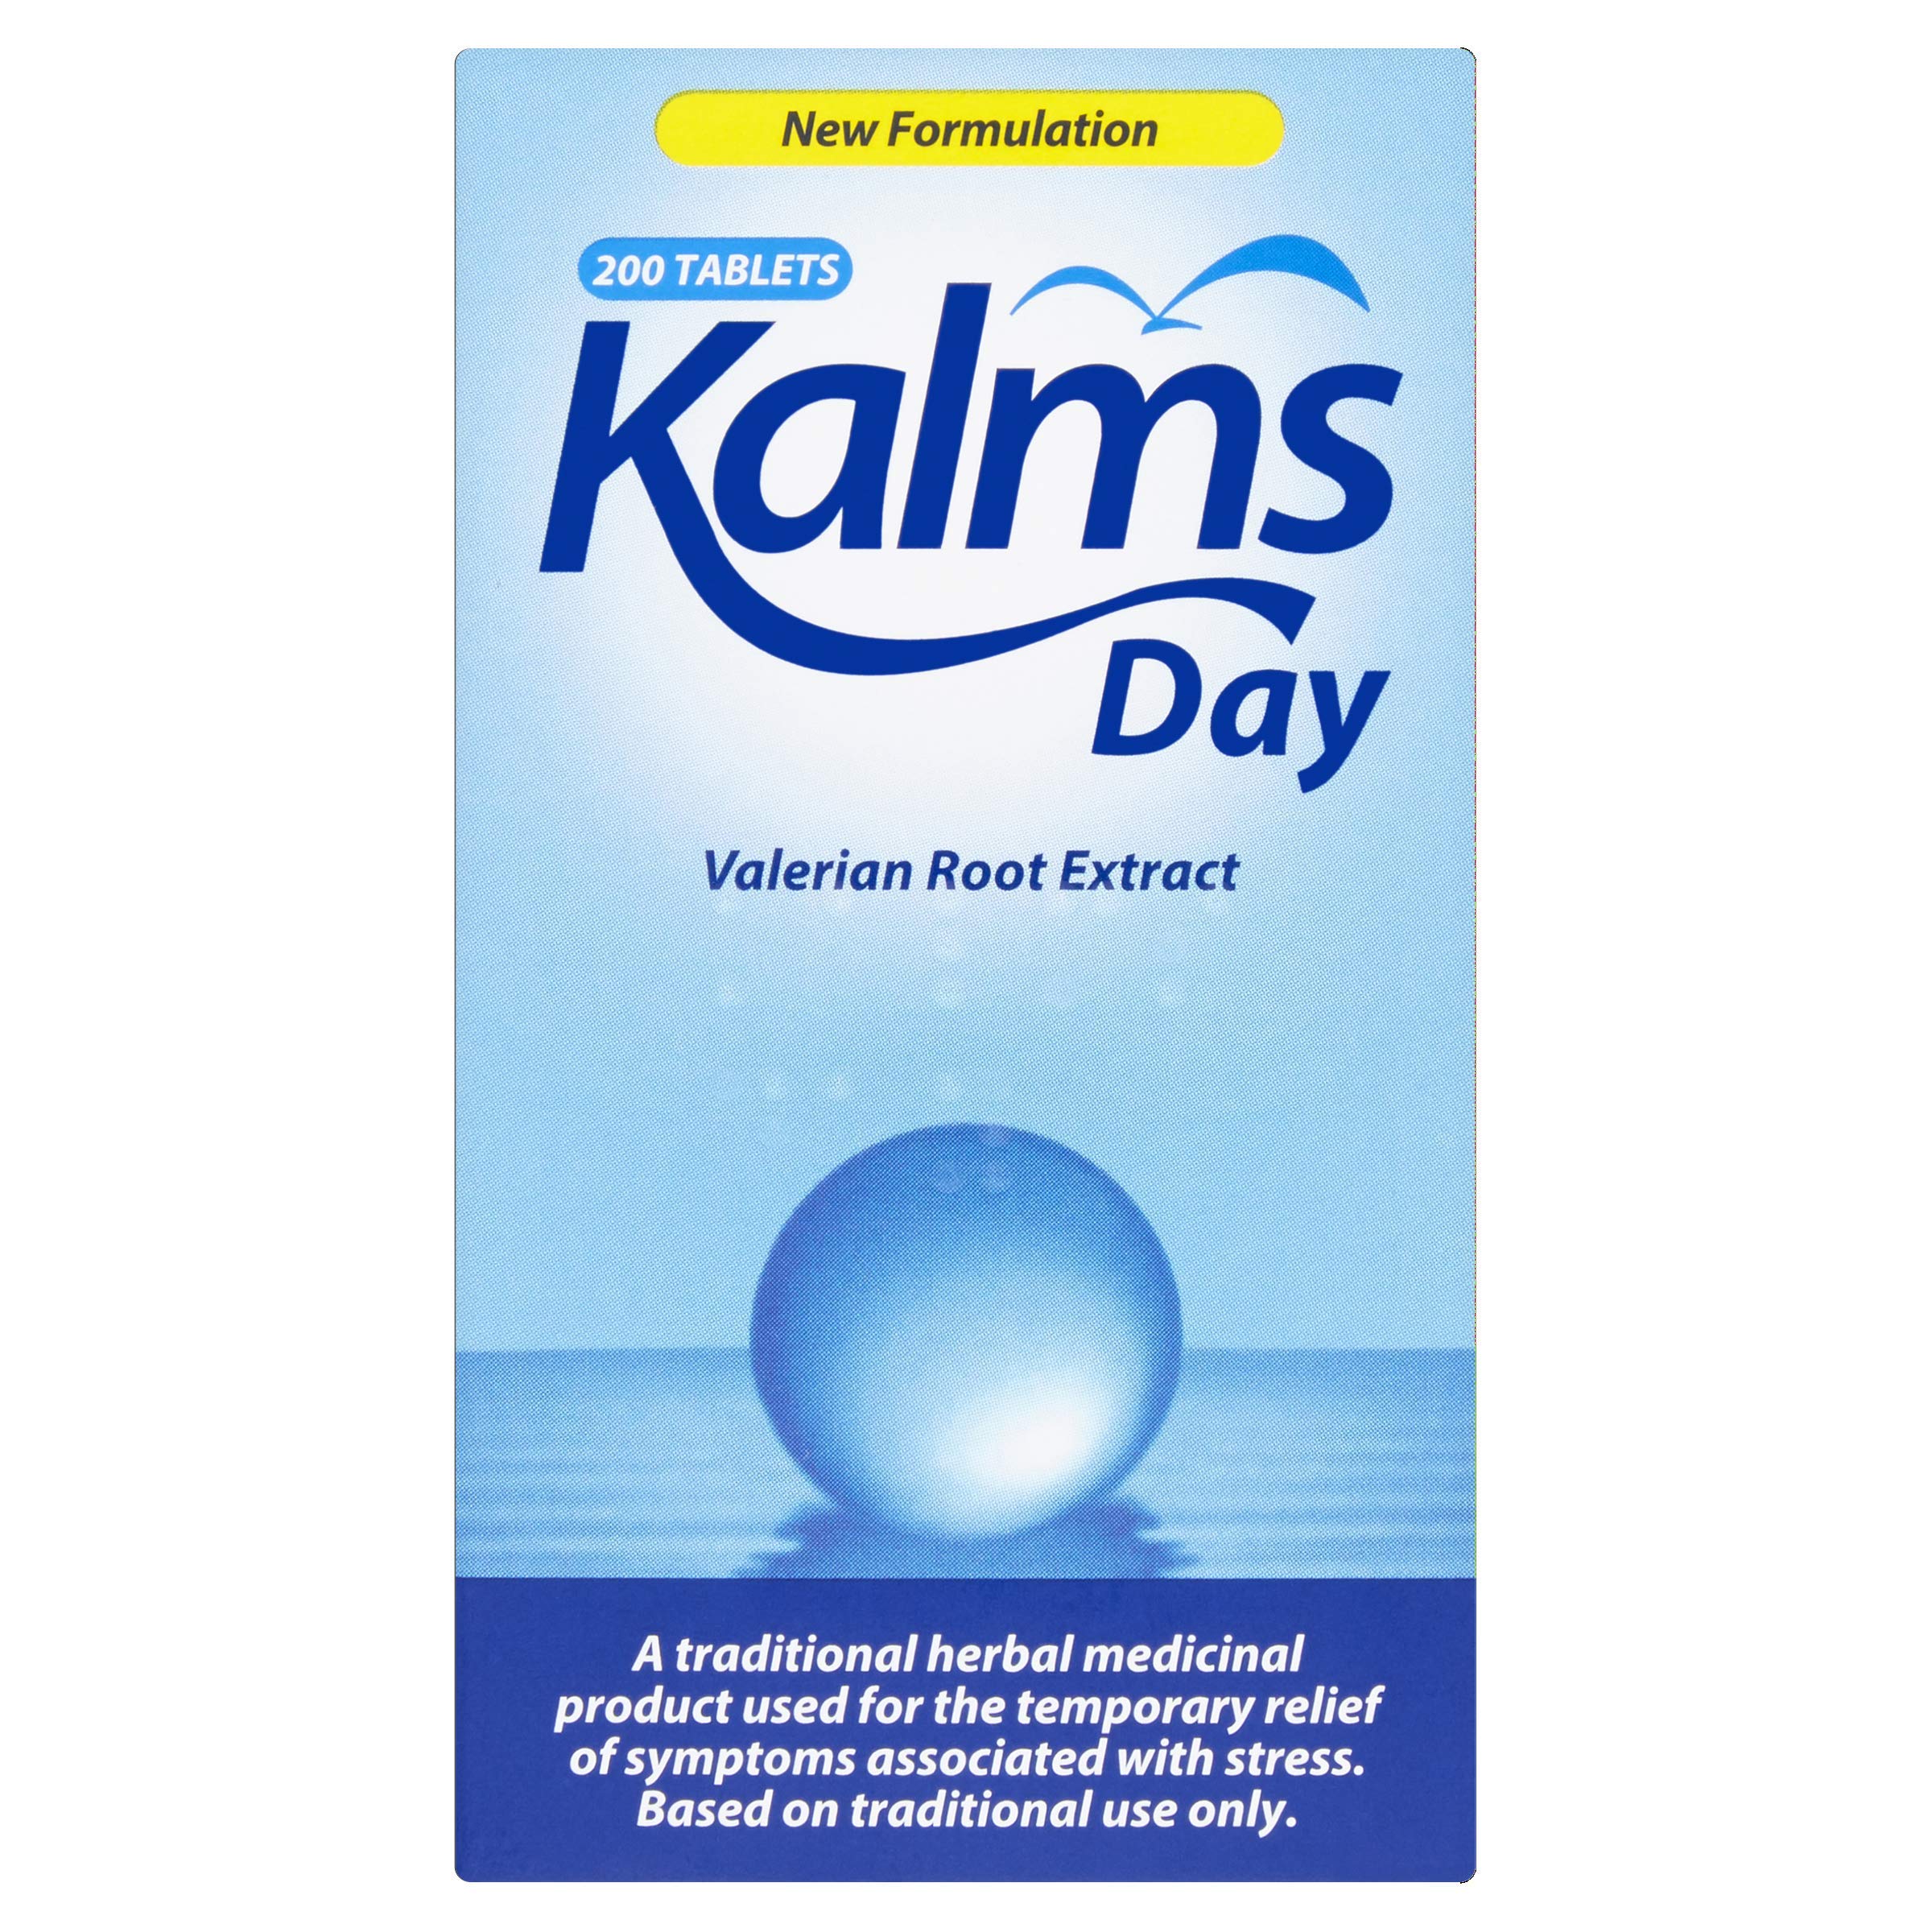 Kalms Day 200 Tablets - Traditional herbal medicinal product used for the temporary relief of symptoms associated with stress.